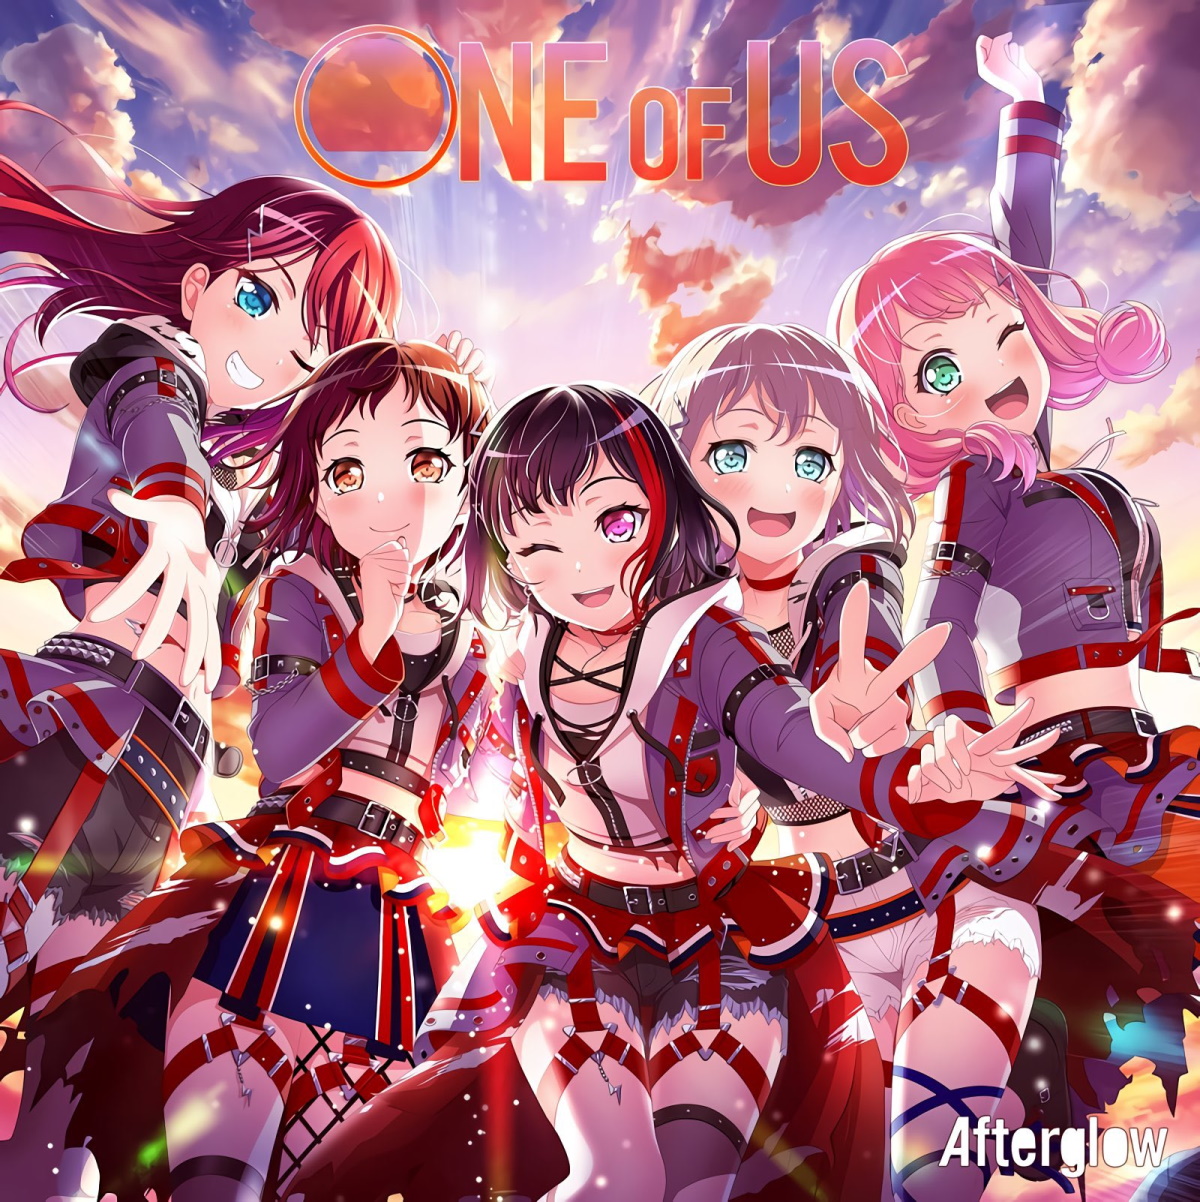 『Afterglow - I knew it!』収録の『ONE OF US』ジャケット